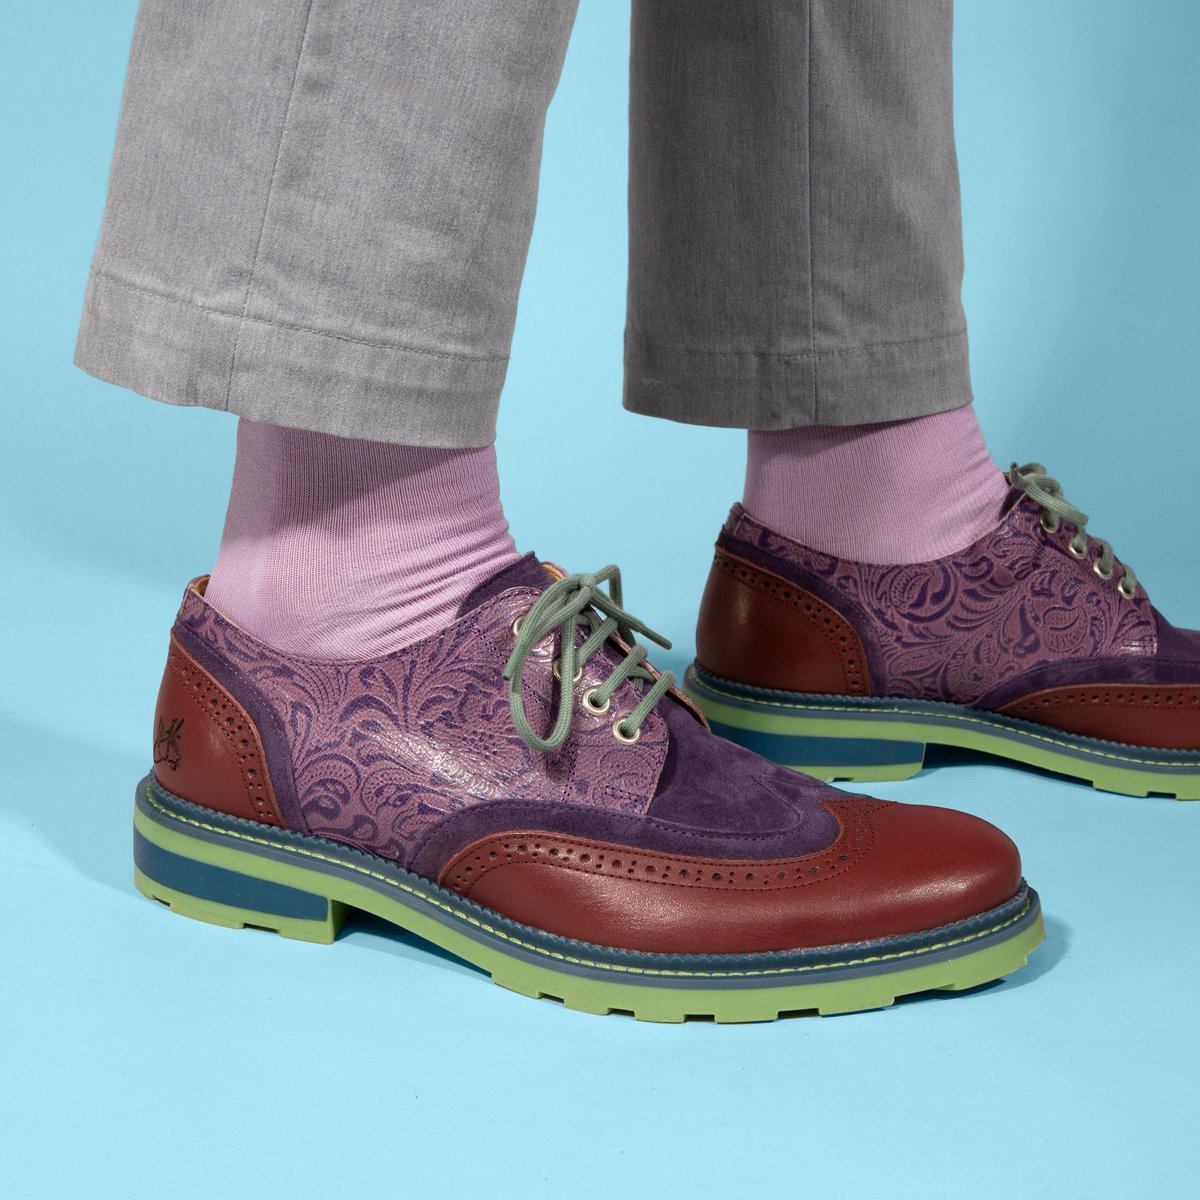 Purple paisley perfection & swoon-worthy sophistication! 💜 Peep the #FluevogDay #LimitedEdition LOTUS & NATHANIEL! 🤩 Available May 15. ⁠ Plus, here's a look at our early bird in-store giveaway... The Bhadra Vog Socks in a matching colo(u)rway! Details: vo.gg/fluevog-day